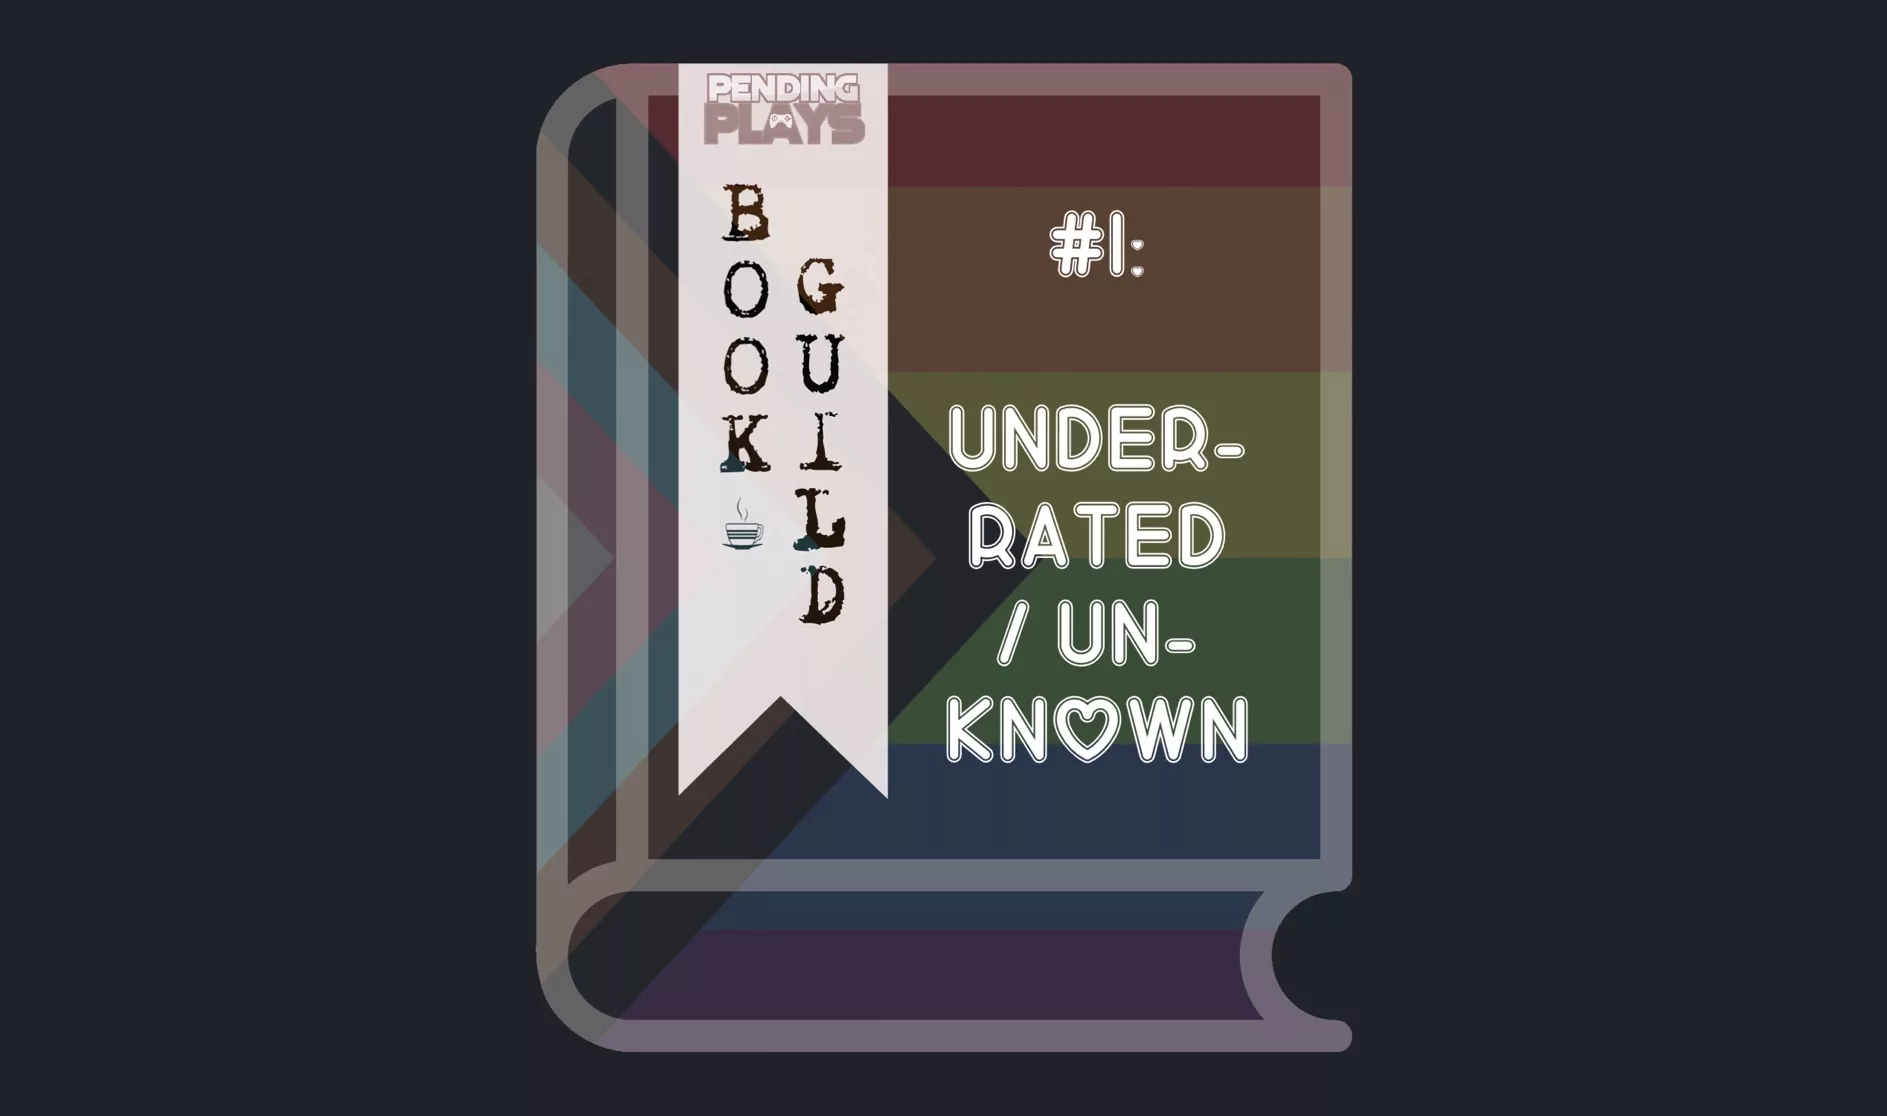 A book icon with the pride flag as its cover. A bookmark on the left side of the book, with the Pending Plays logo at the top and "Book Guild" in vertical format below. On the right of the book it says "#1 Underrated / unknown" in capslog letters.